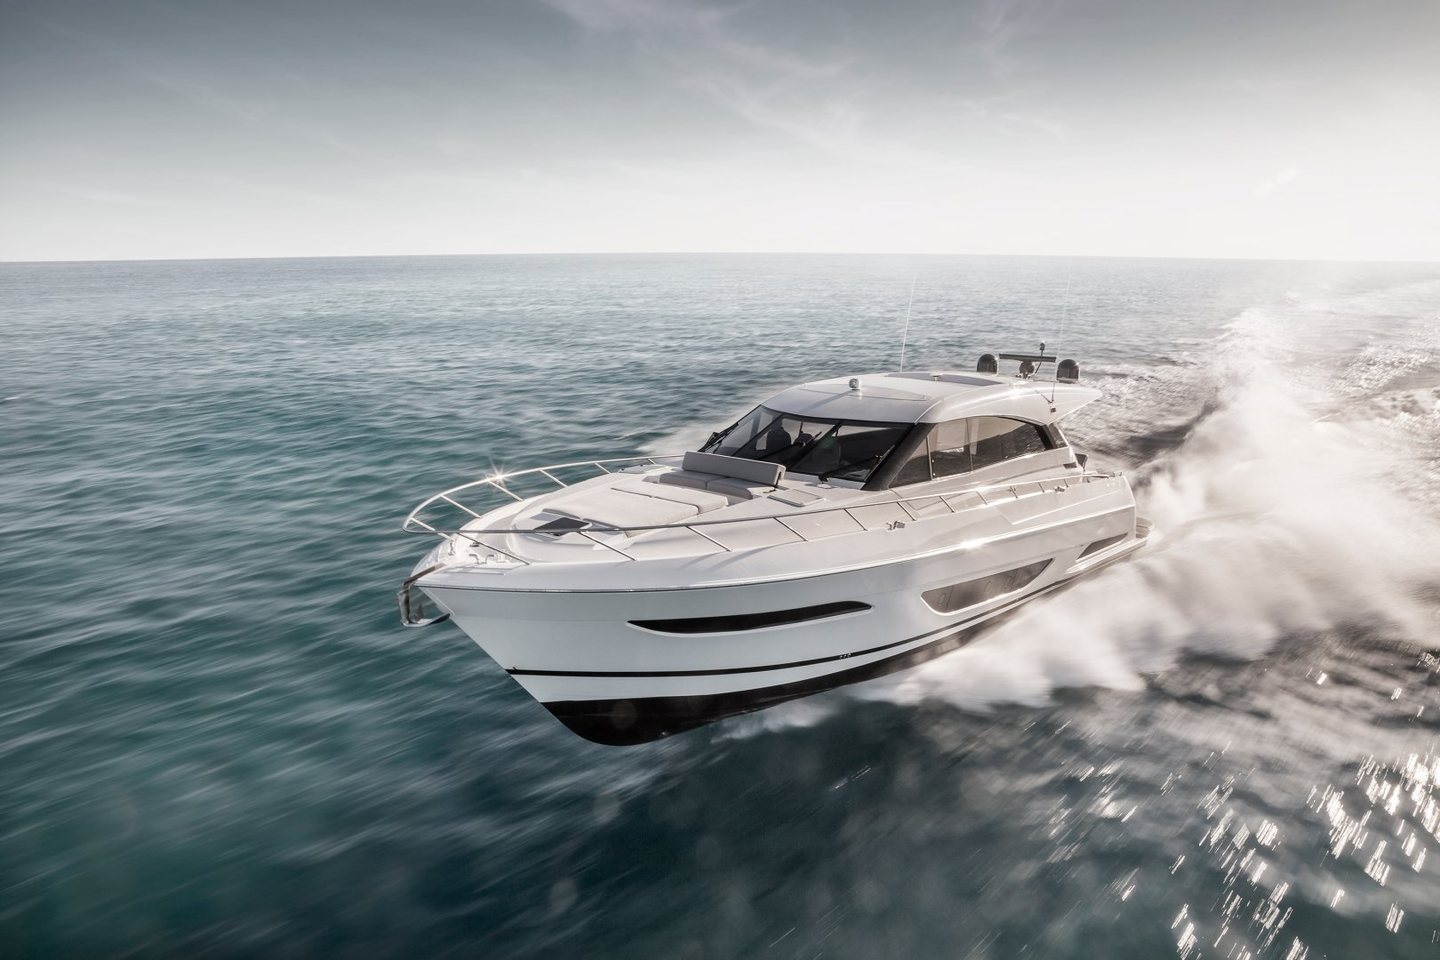 360 VR Virtual Tours of the Maritimo X60